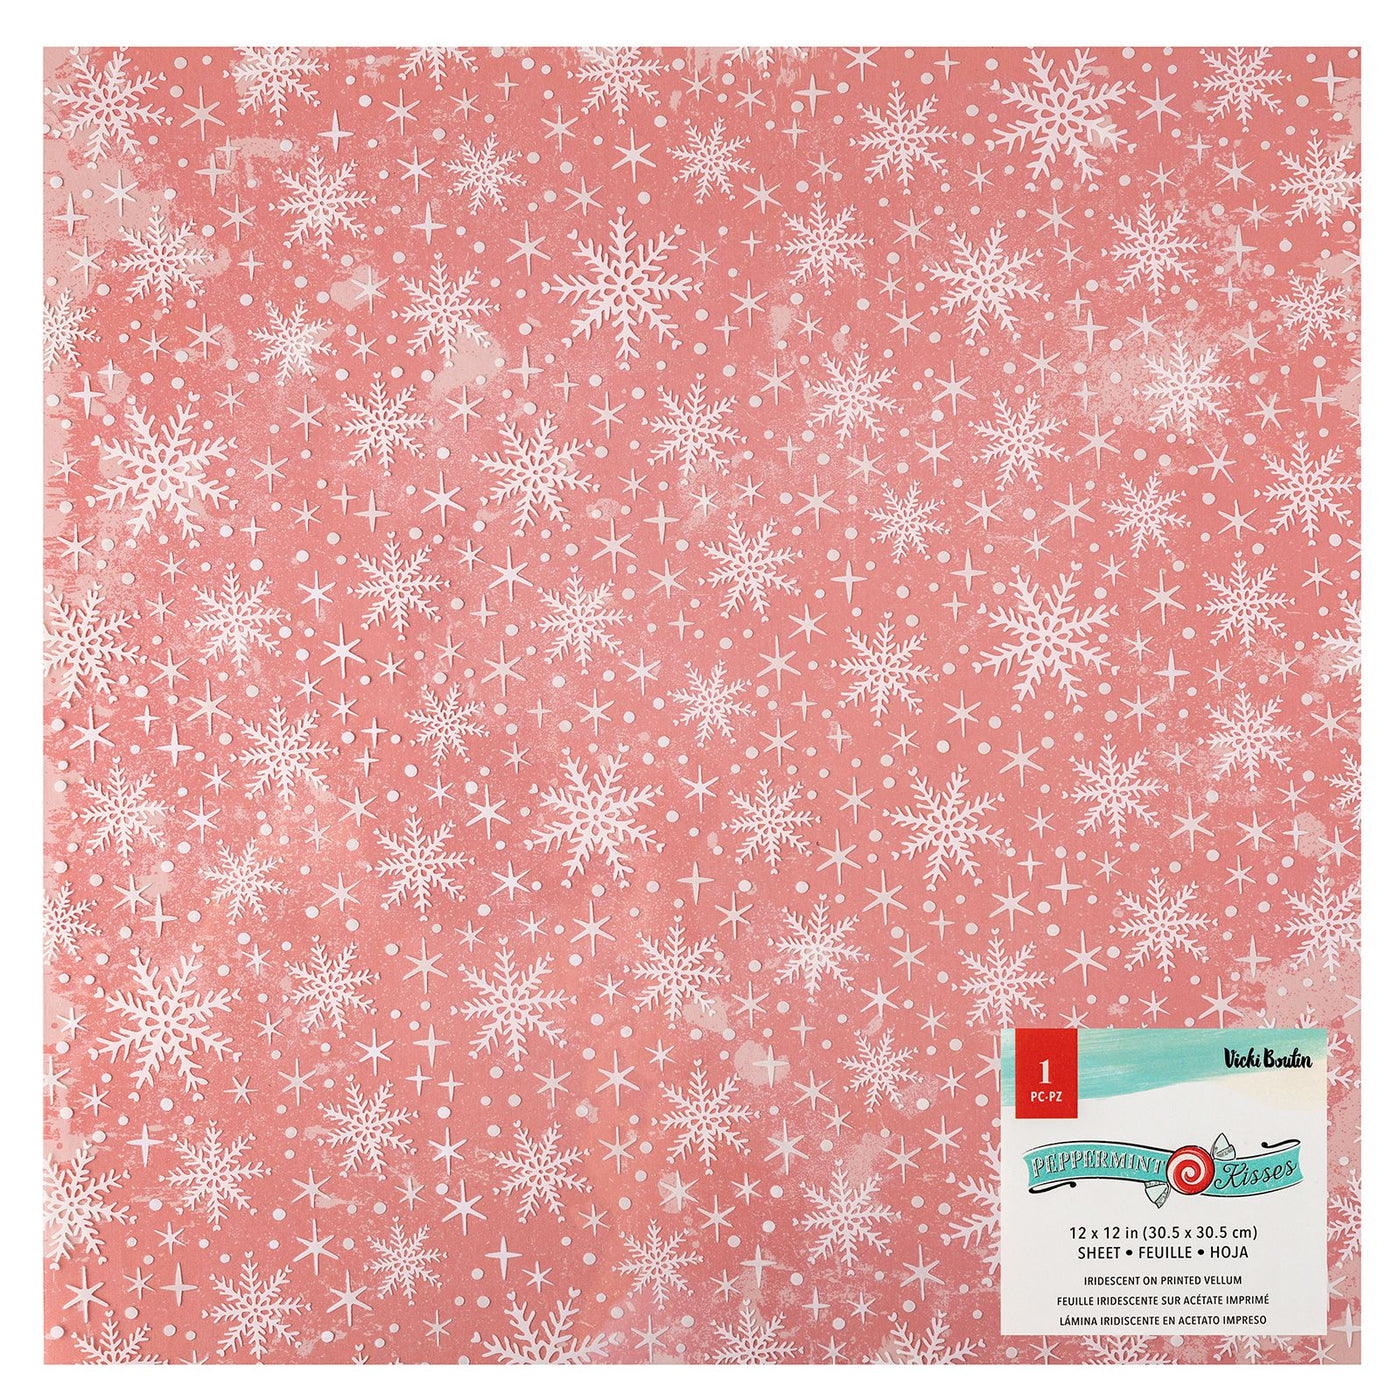 12x12 specialty paper. Layer your favorite memories with vibrant pops of iridescent foil snowflakes on clear acetate.  Vicki Boutin